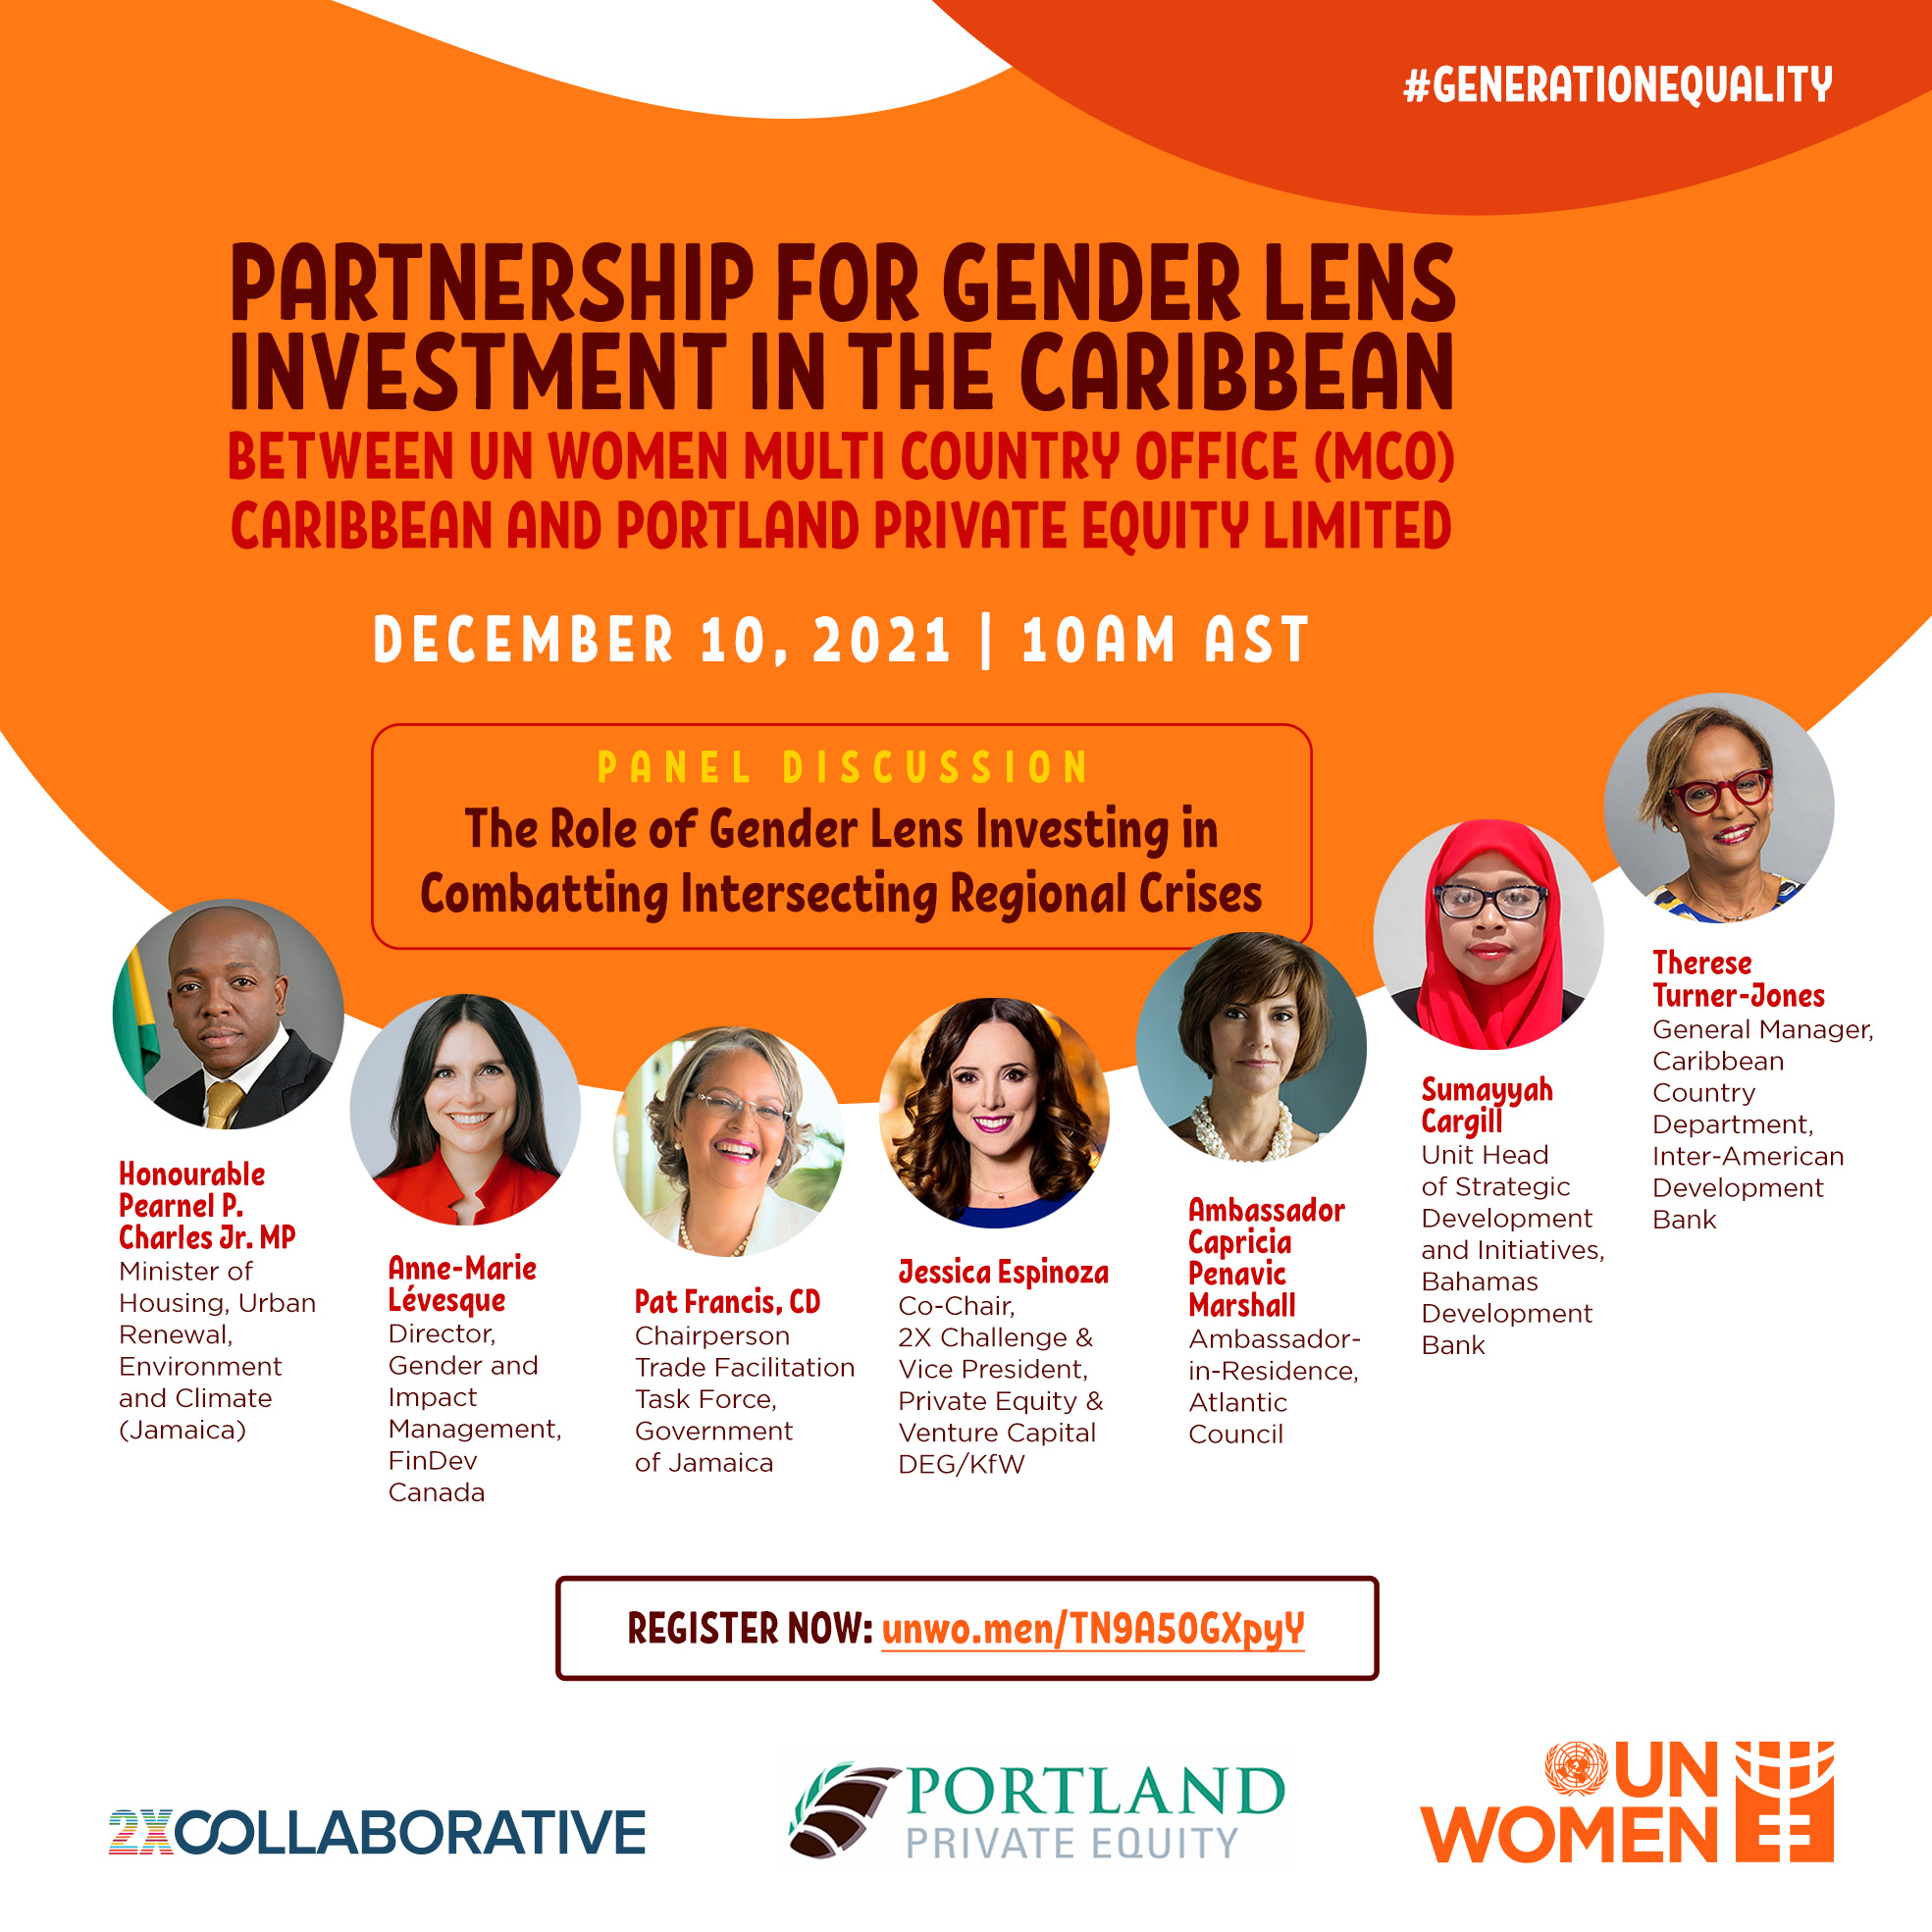 MOU signing between Portland Private Equity and UN Women MCO -- Friday Dec 10, 2021 at 9am EST